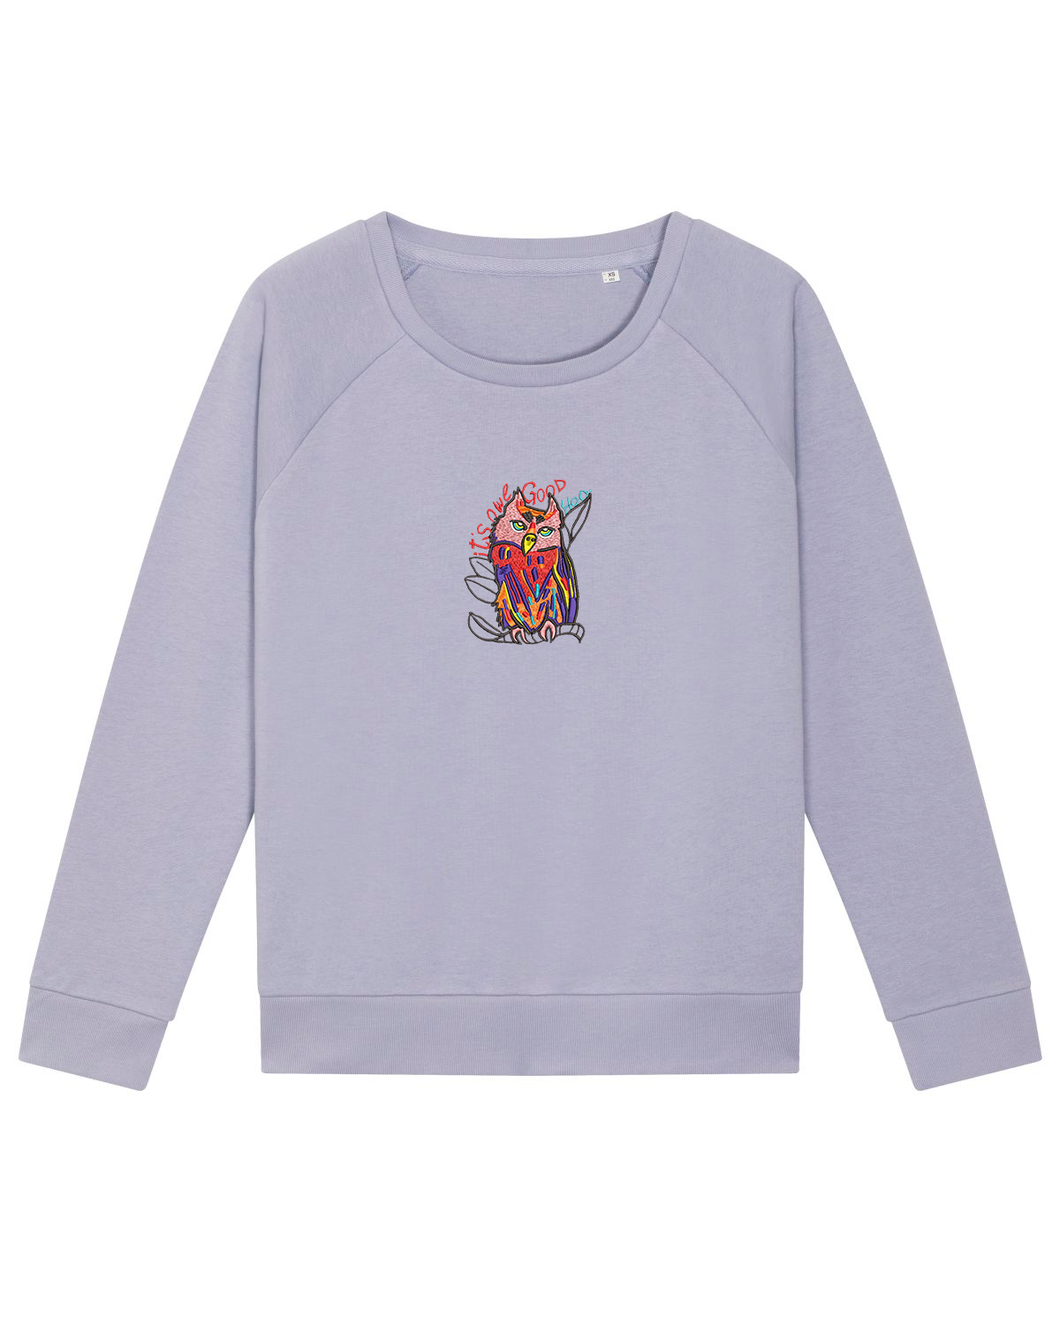 iT'S OWL GOOD 🦉 HOO. - Embroidered WOMEN'S RELAXED FIT SWEATSHIRT